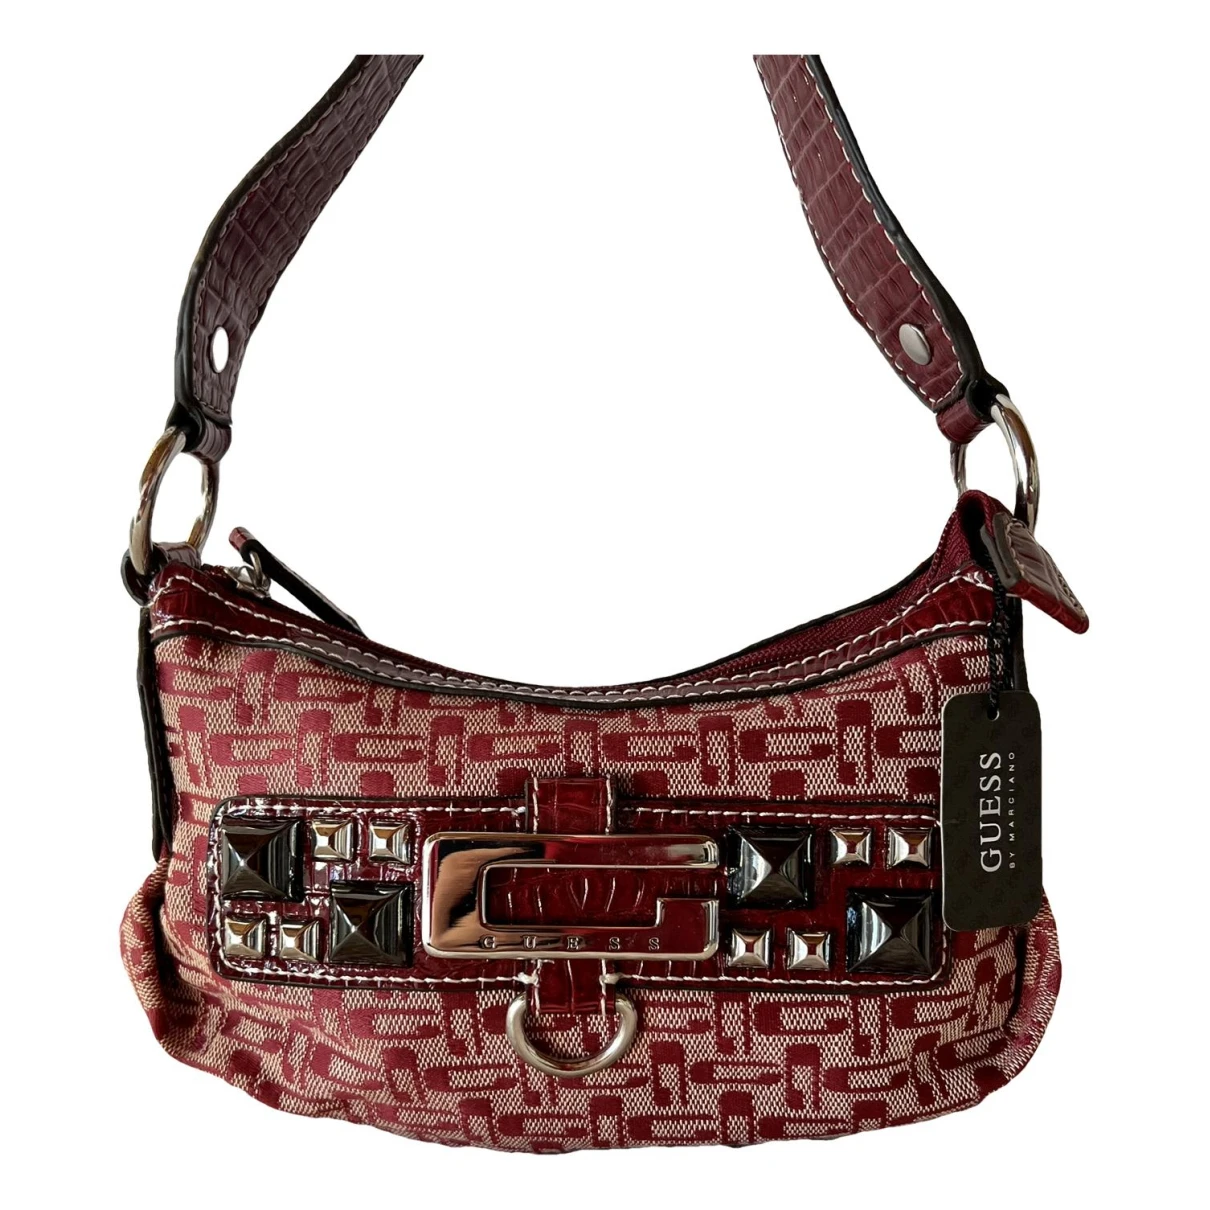 Pre-owned Guess Handbag In Red